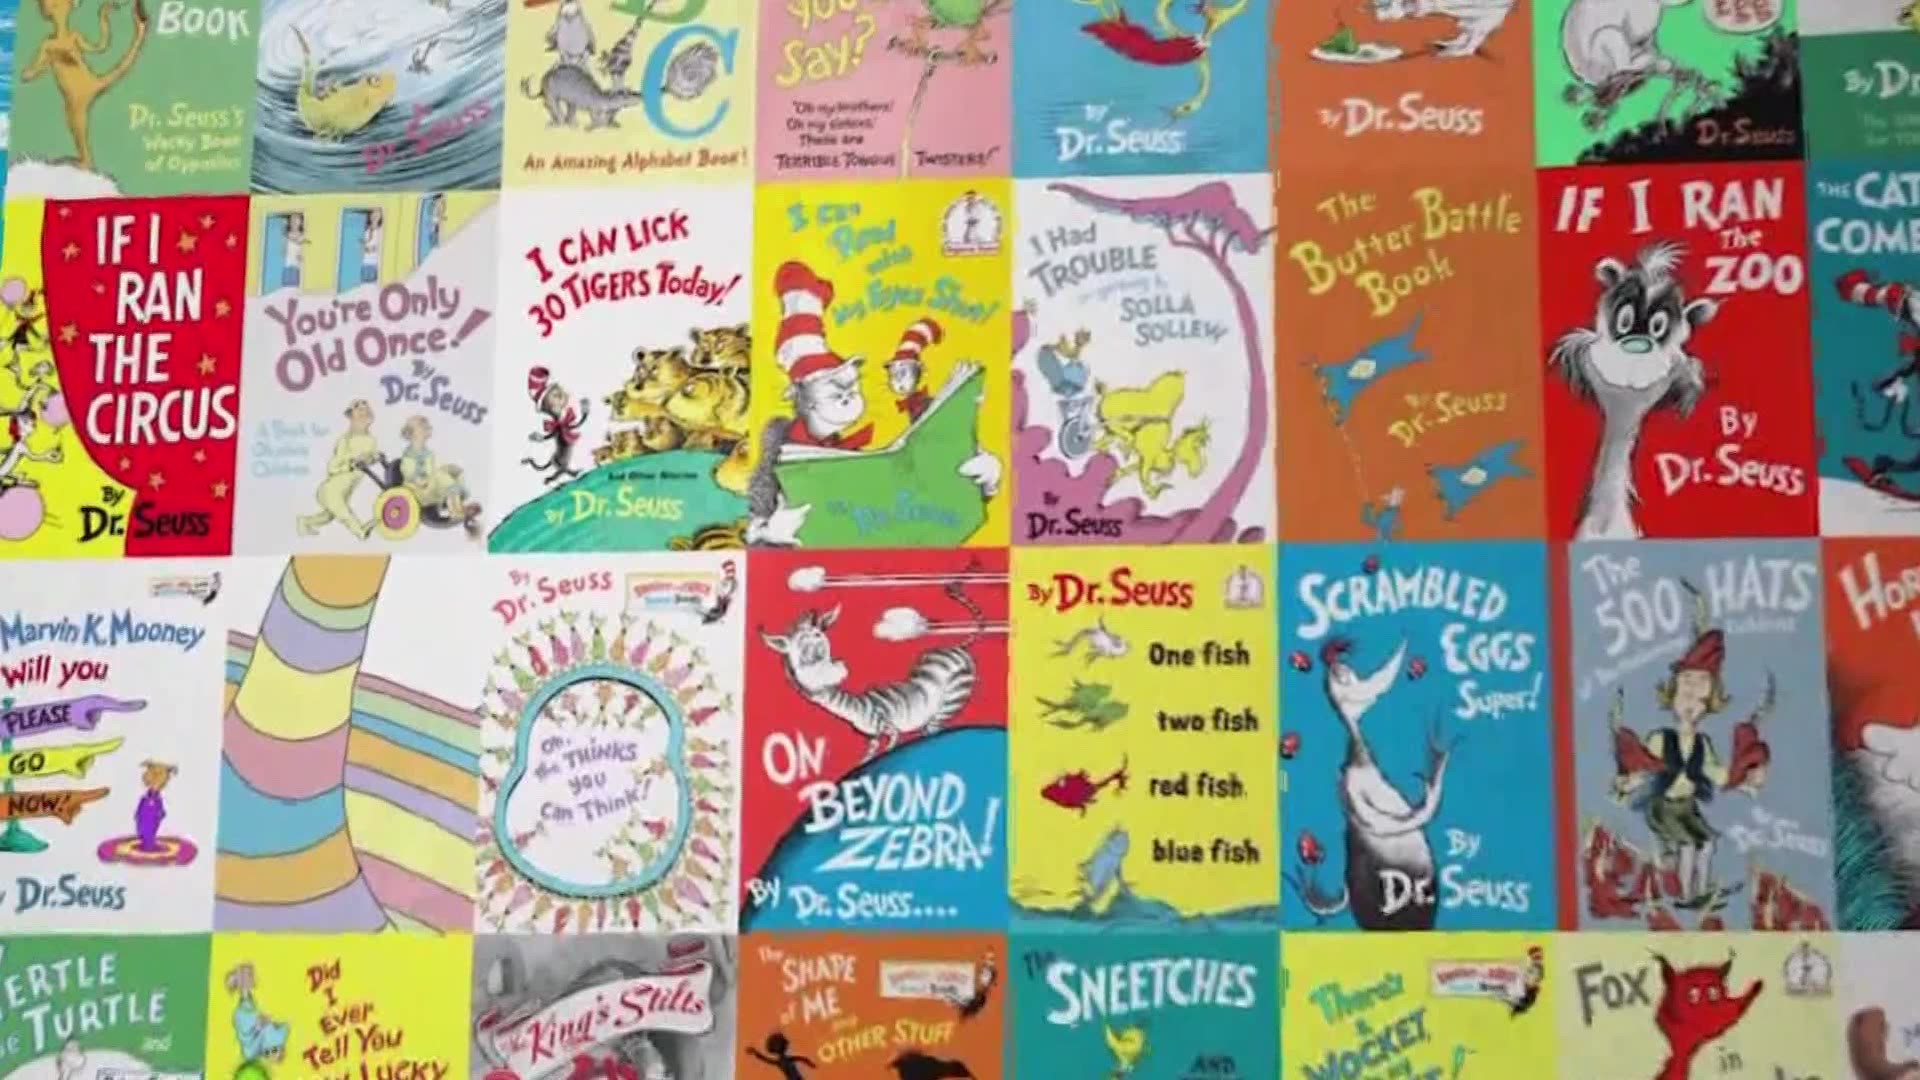 Six books written by Dr. Seuss are being pulled from the shelves over what some say are racist images.